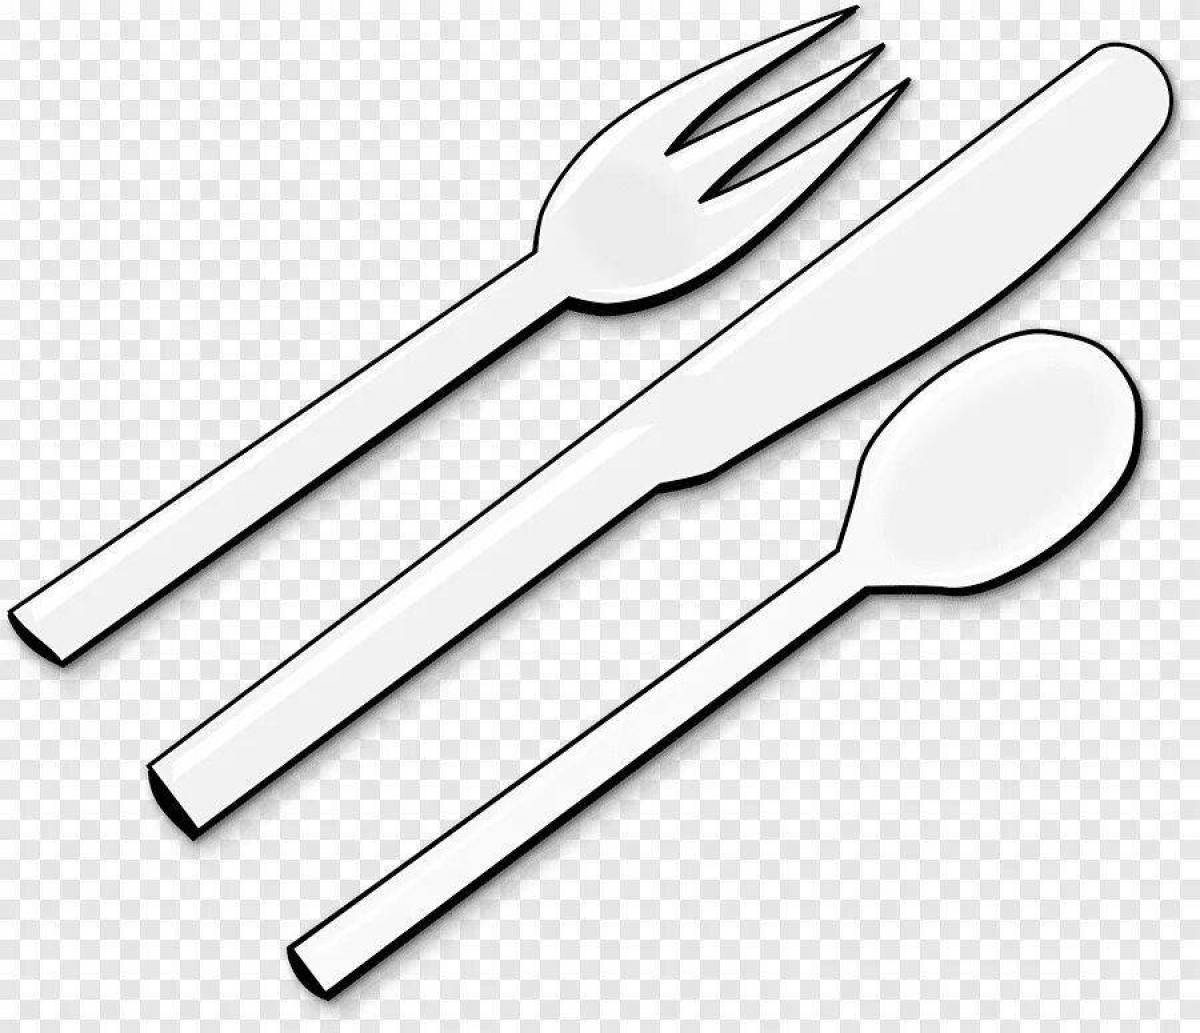 Coloring page delightful cutlery